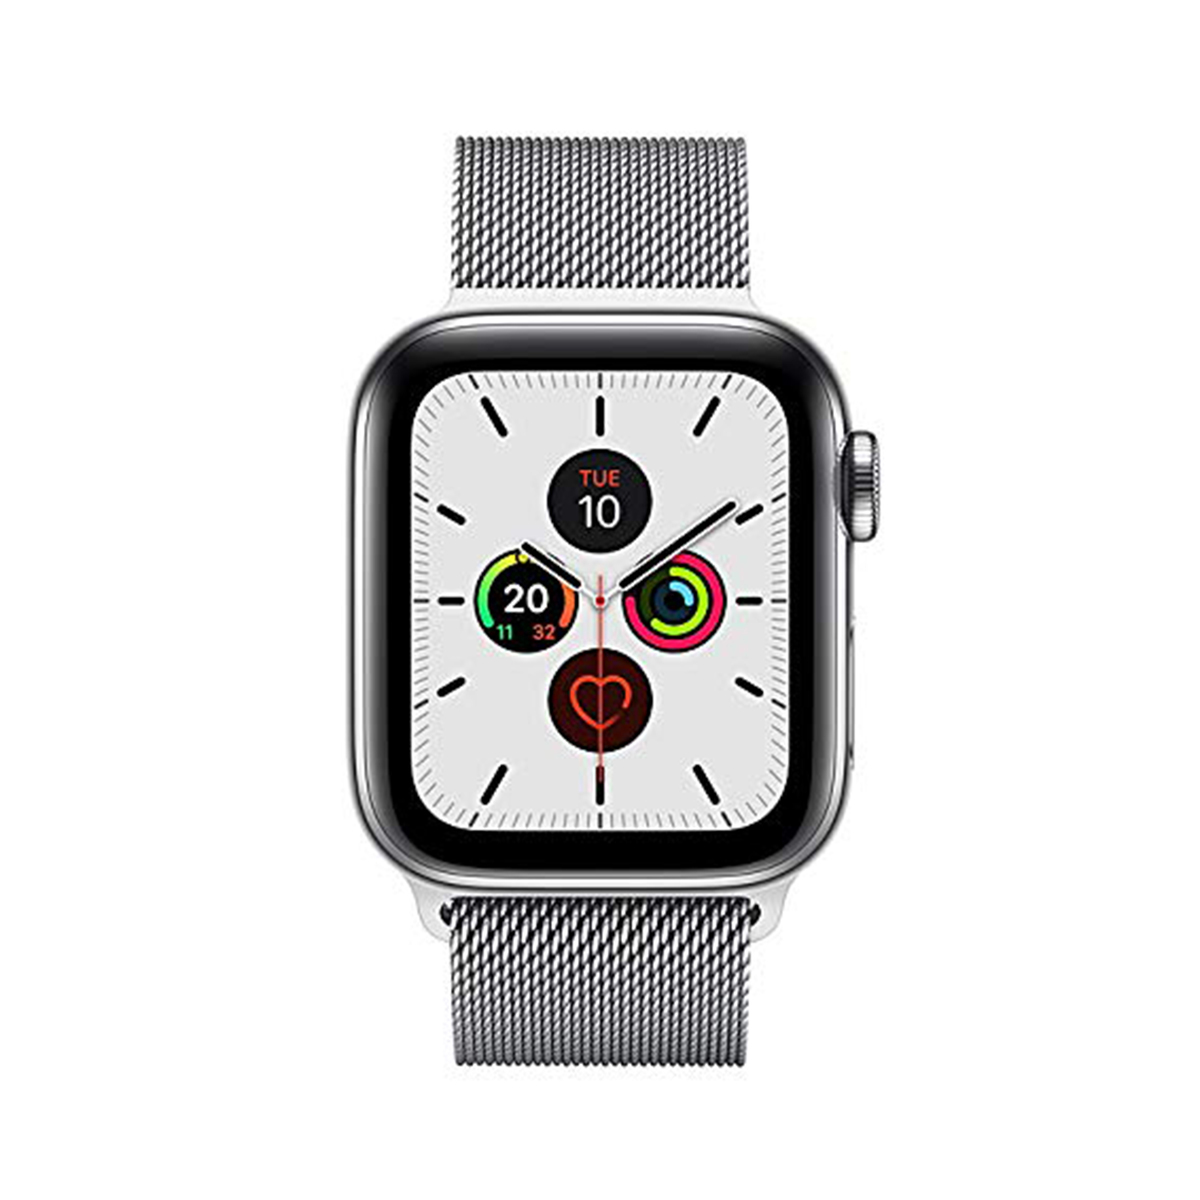 Apple Watch Series 5 GPS + Cellular MWX52AE 40mm Stainless Steel Case with Stainless Steel Milanese Loop